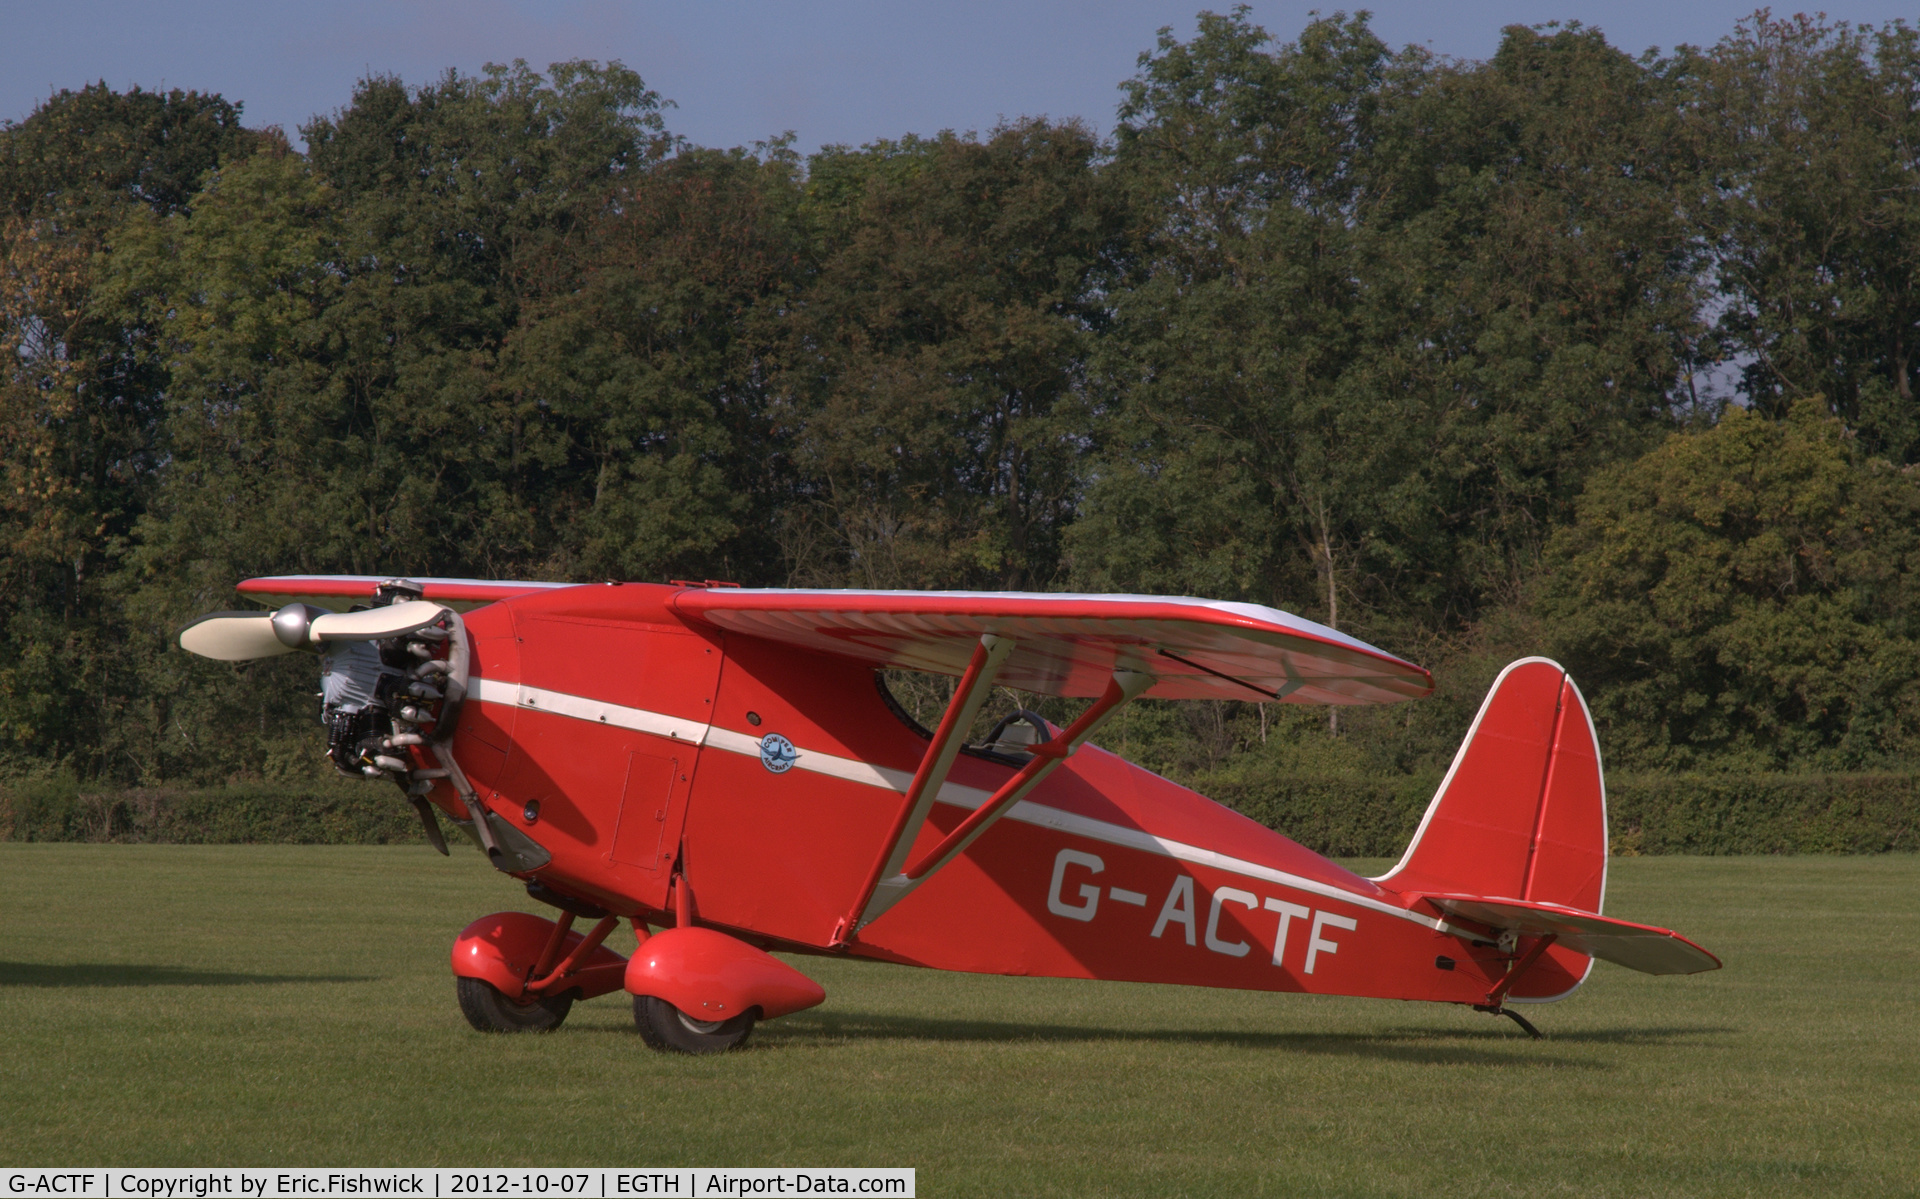 G-ACTF, 1932 Comper CLA-7 Swift C/N S32/9, 1. G-ACTF at Shuttleworth Autumn Air Show, October, 2012